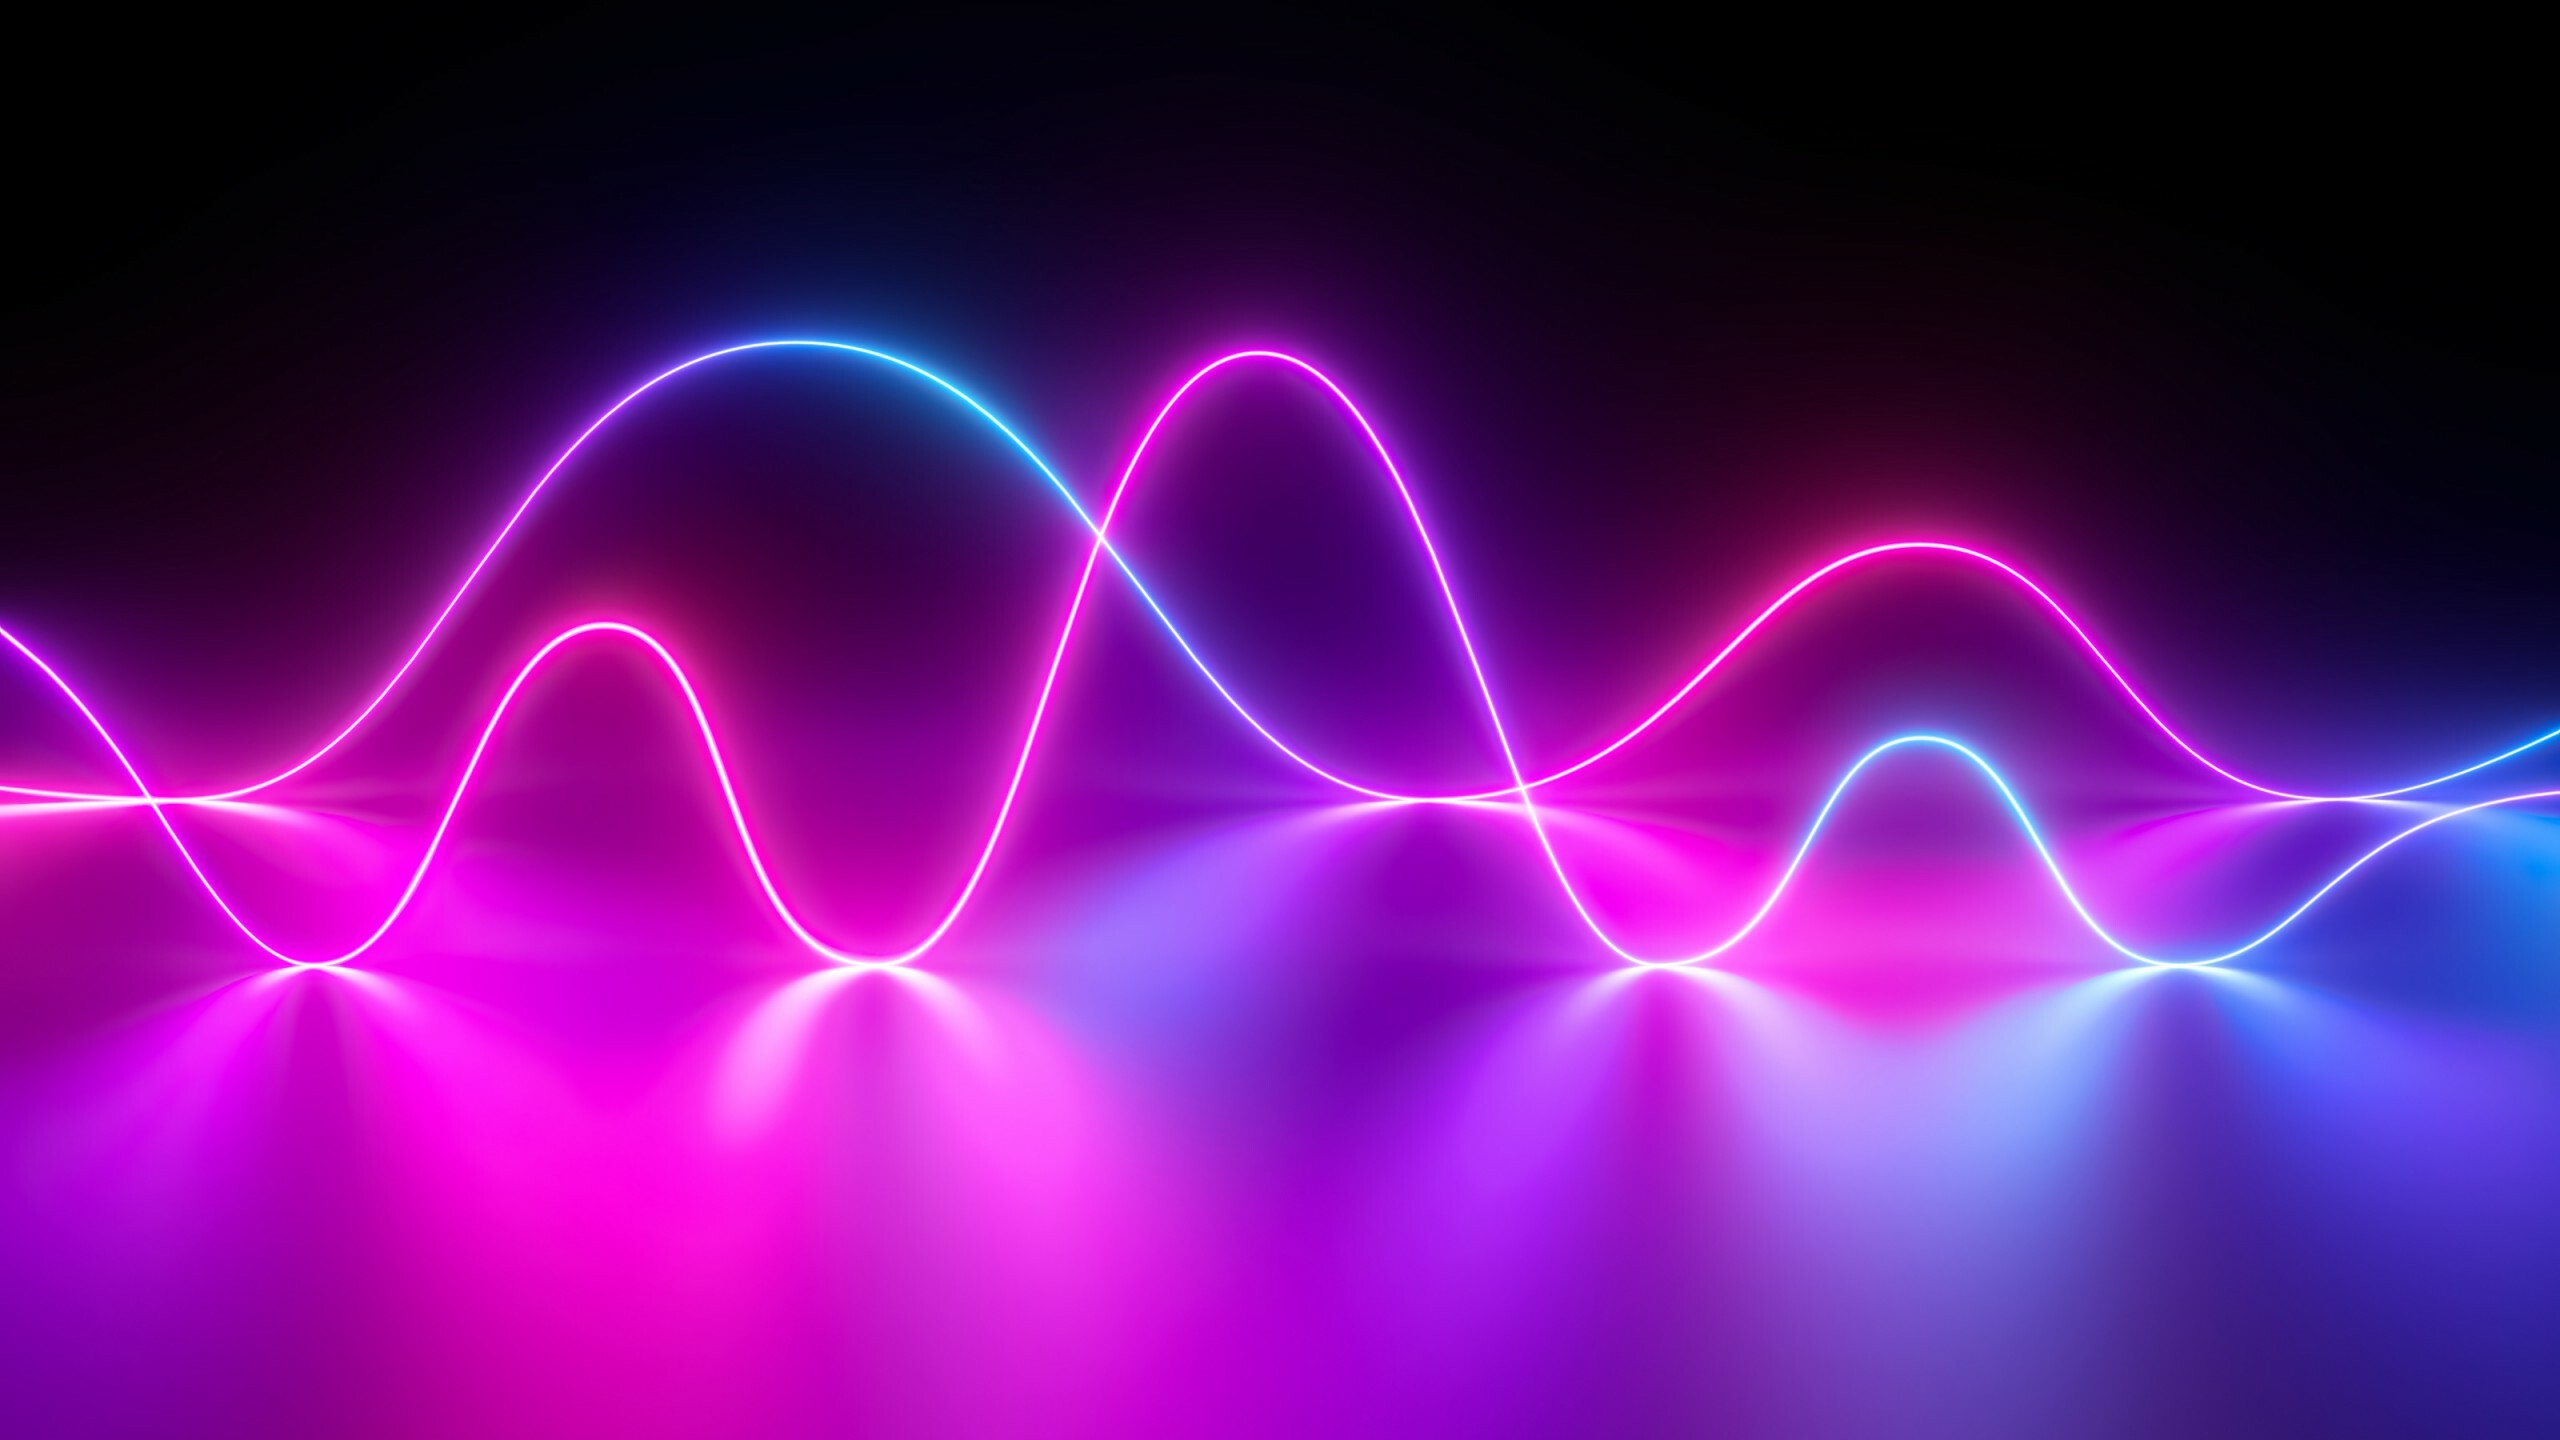 Neon: Combination of colors and shapes creates a sense of movement and energy. 2560x1440 HD Background.